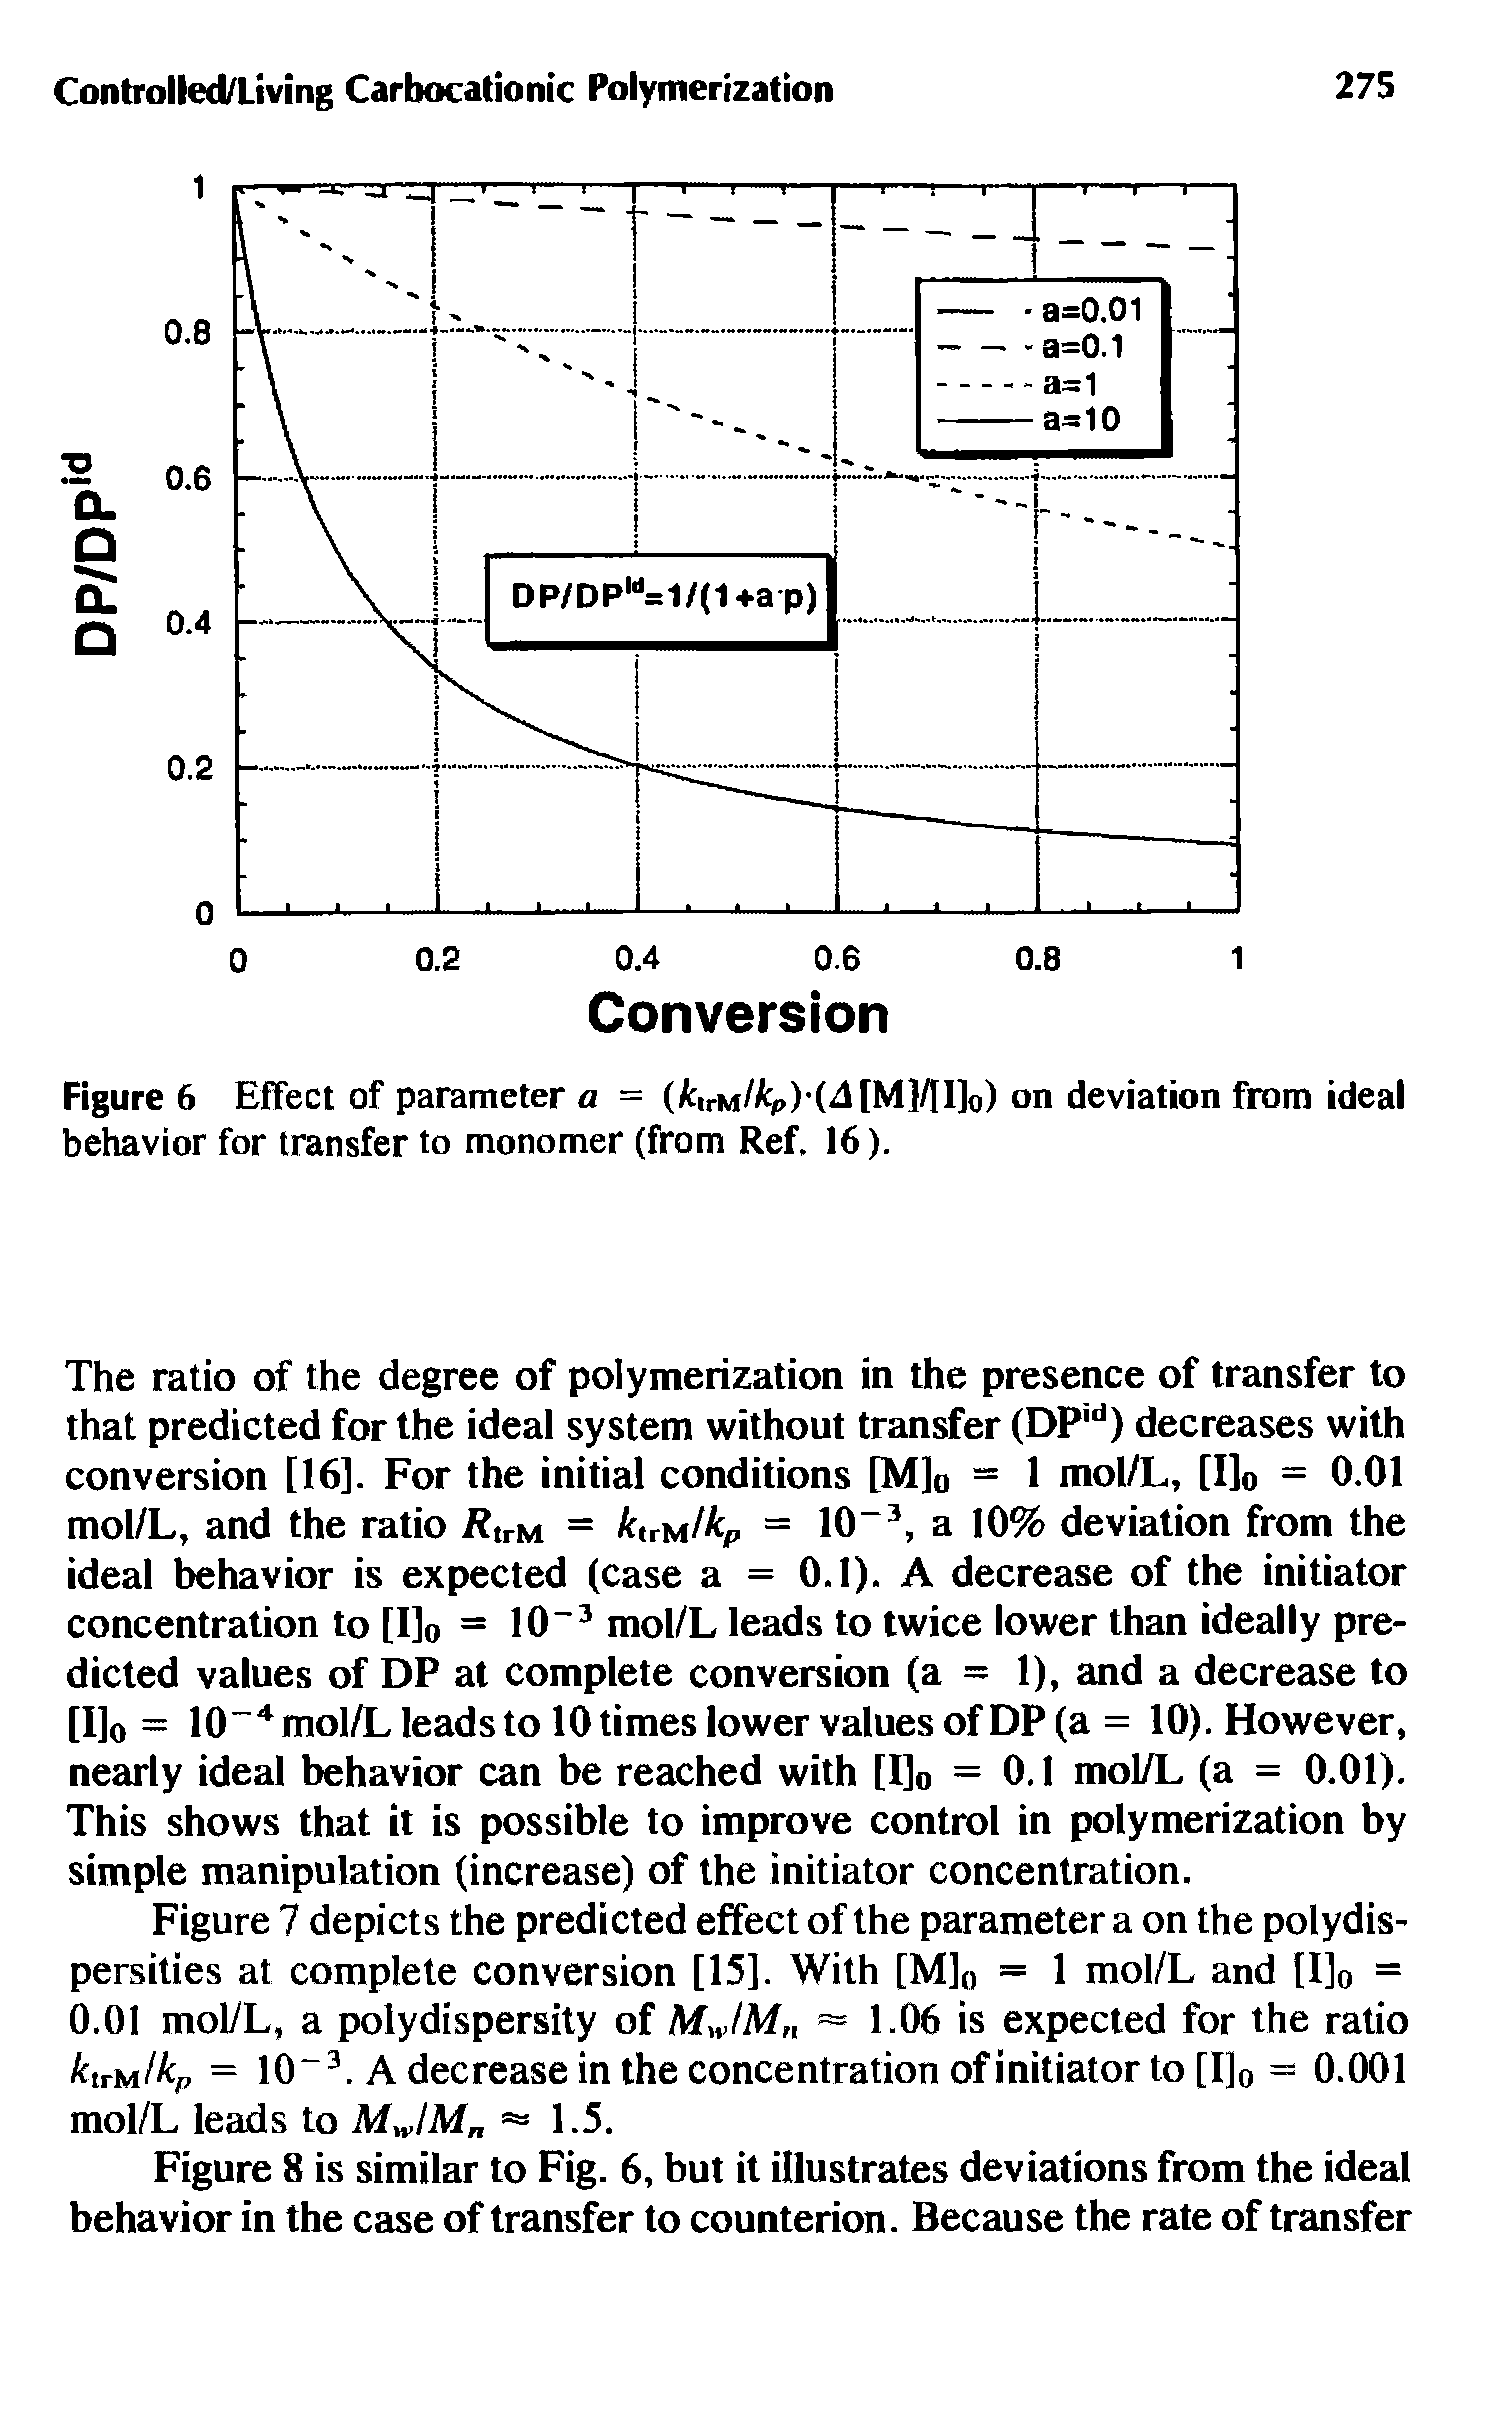 Figure 6 Effect of parameter a = (k,rMlkp)-(A [M)/[I]o) on deviation from ideal behavior for transfer to monomer (from Ref. 16).